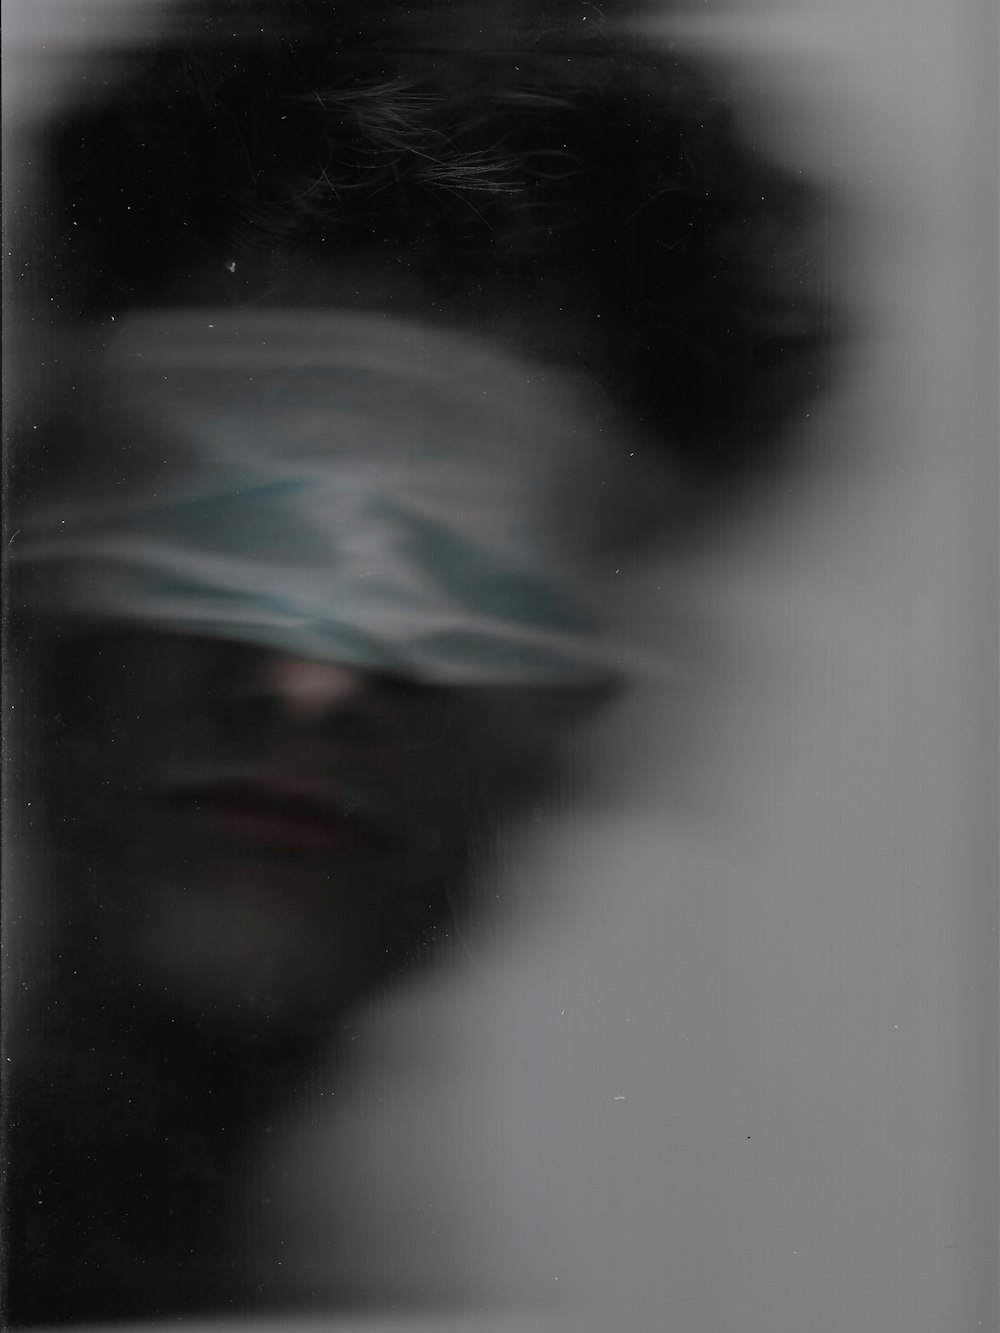 a blurry photo of a person with a blindfold